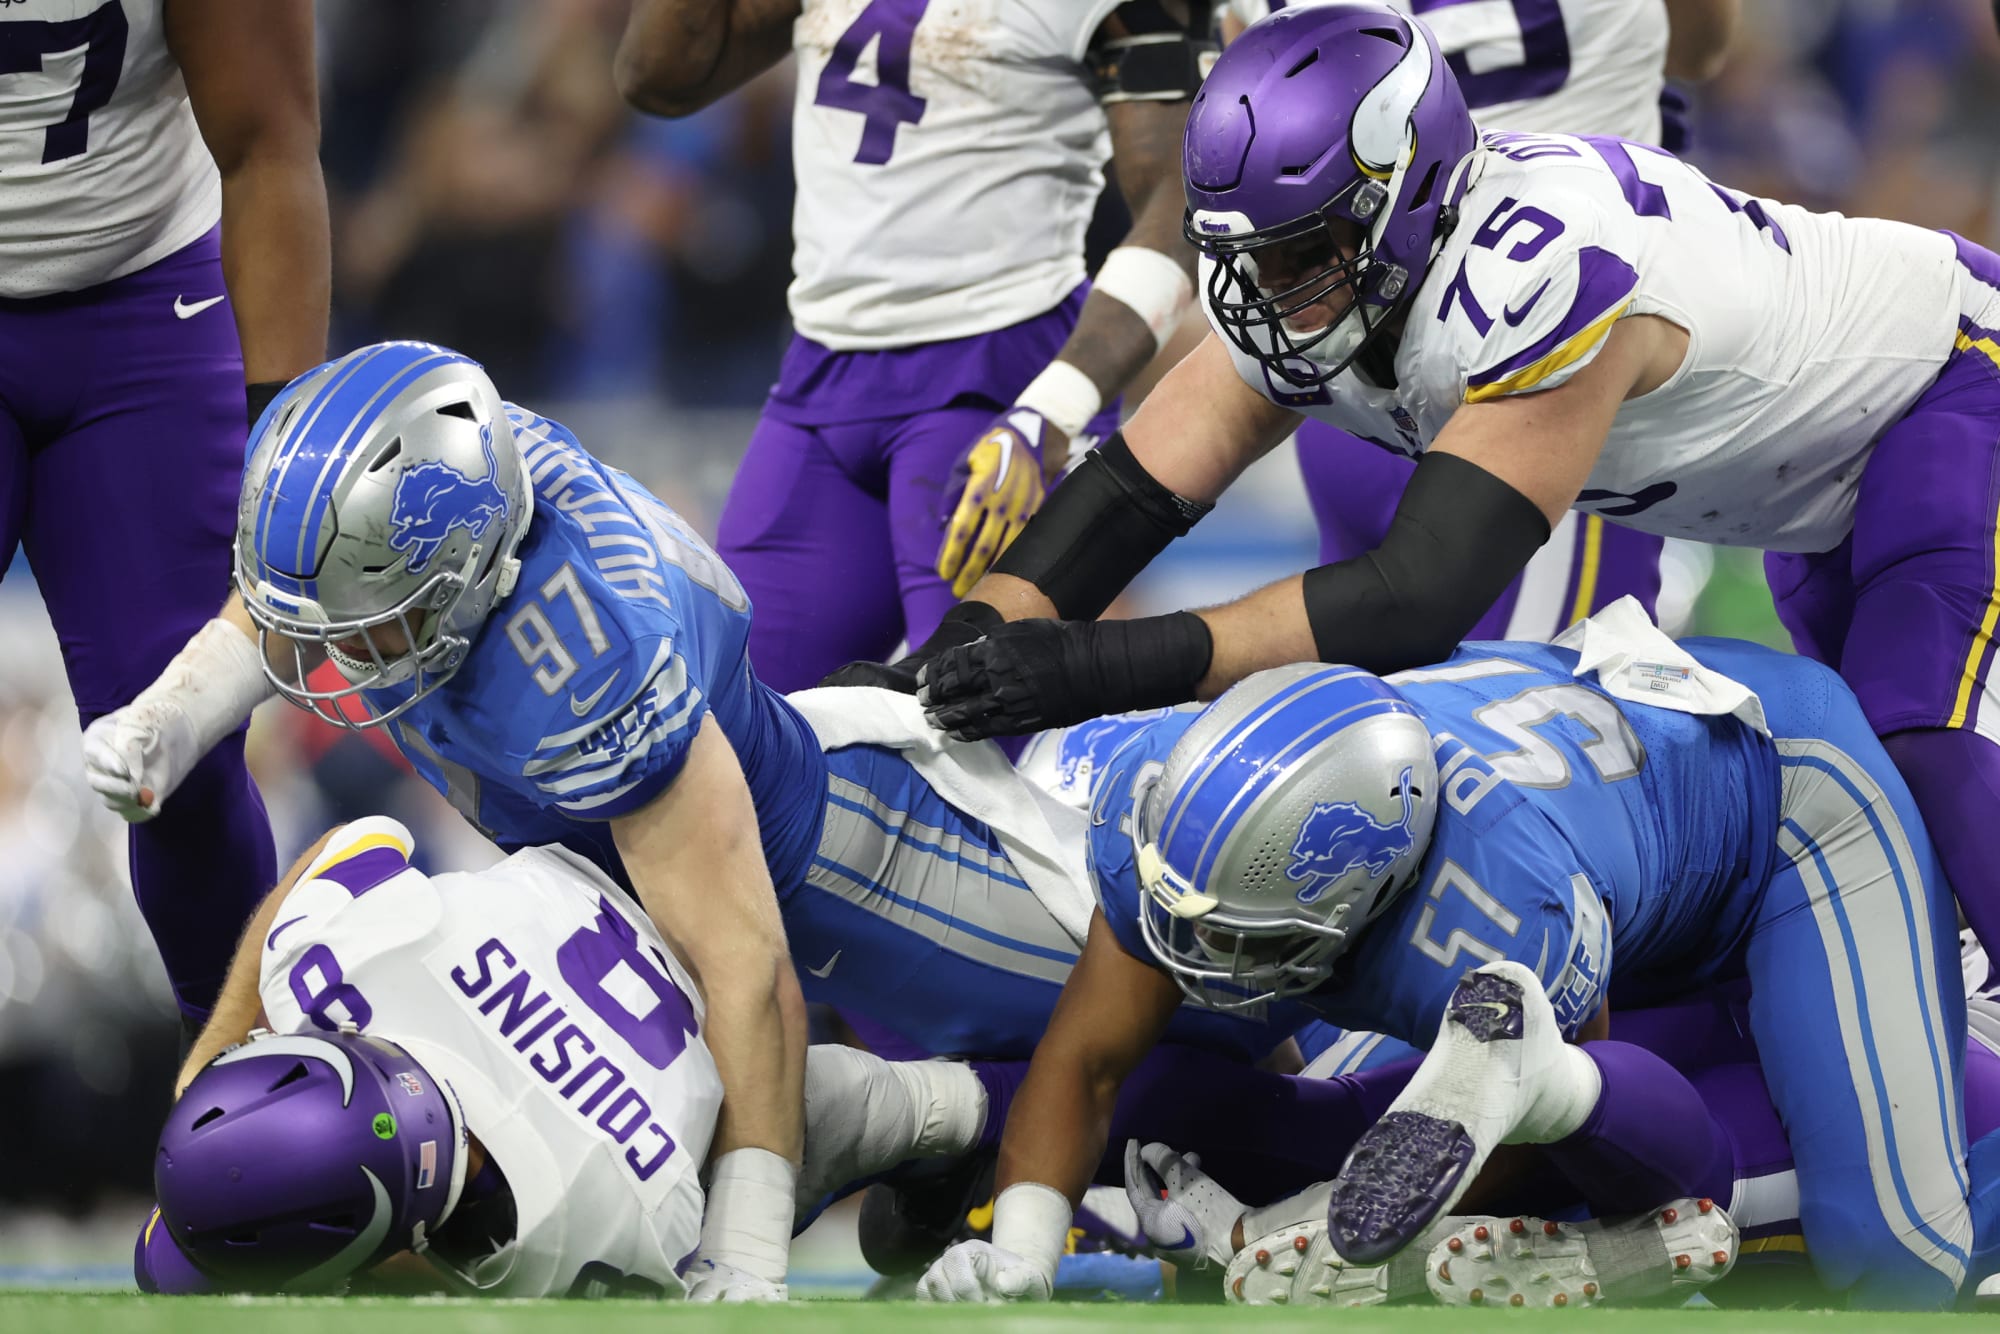 Updated NFC Playoff Picture, NFC Wild Card standings after Vikings lose